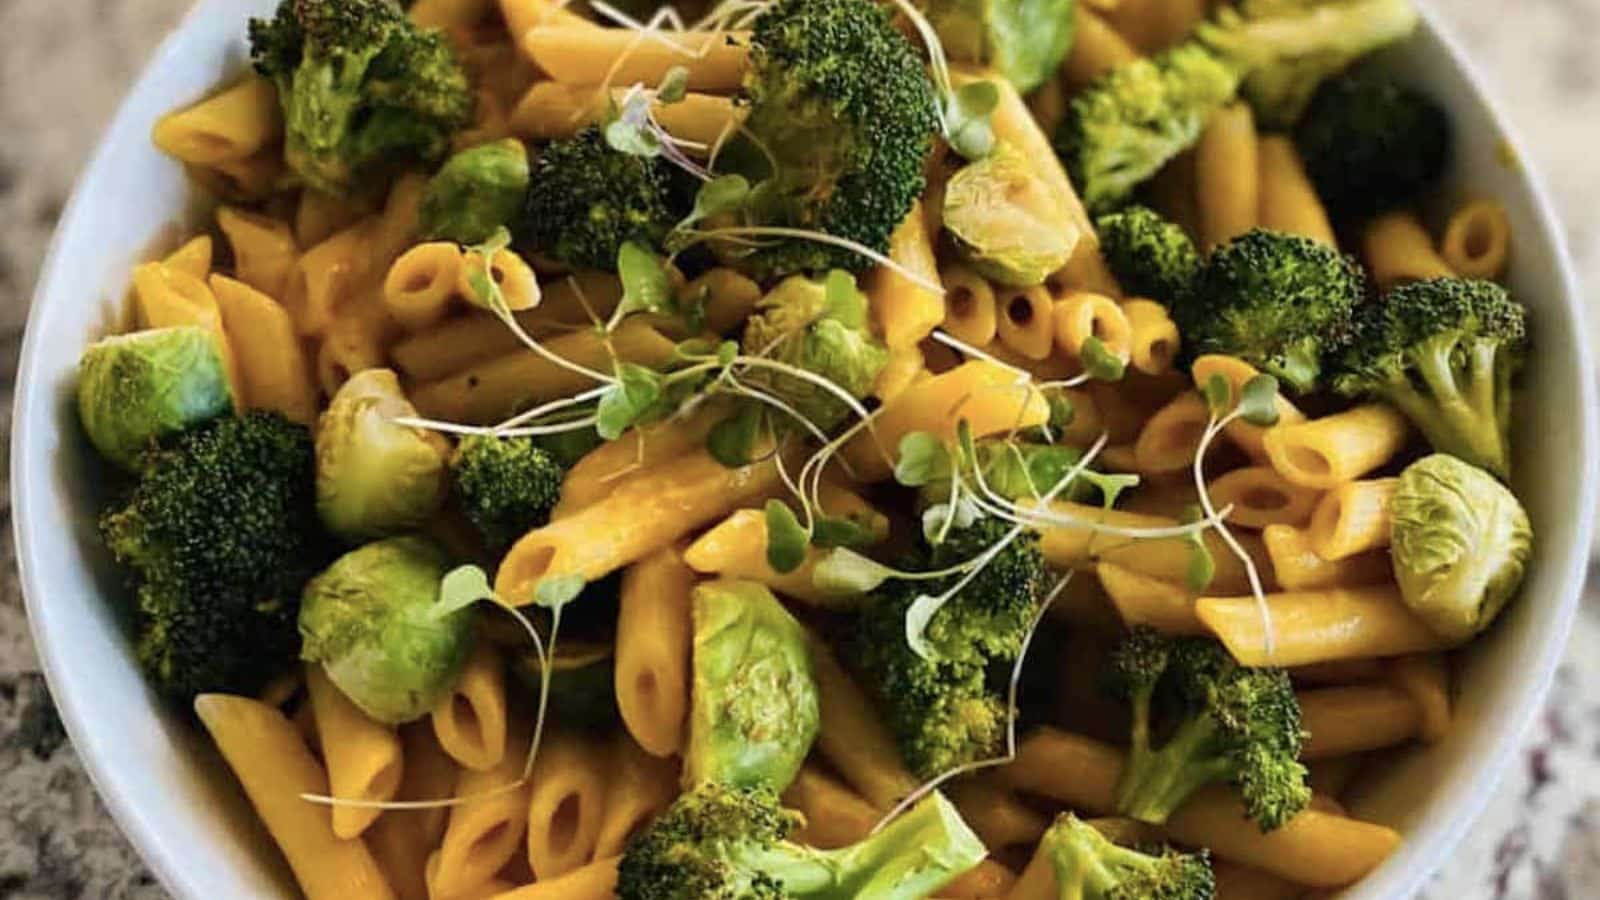 Butternut squash pasta with roasted broccoli and brussels sprouts. 
